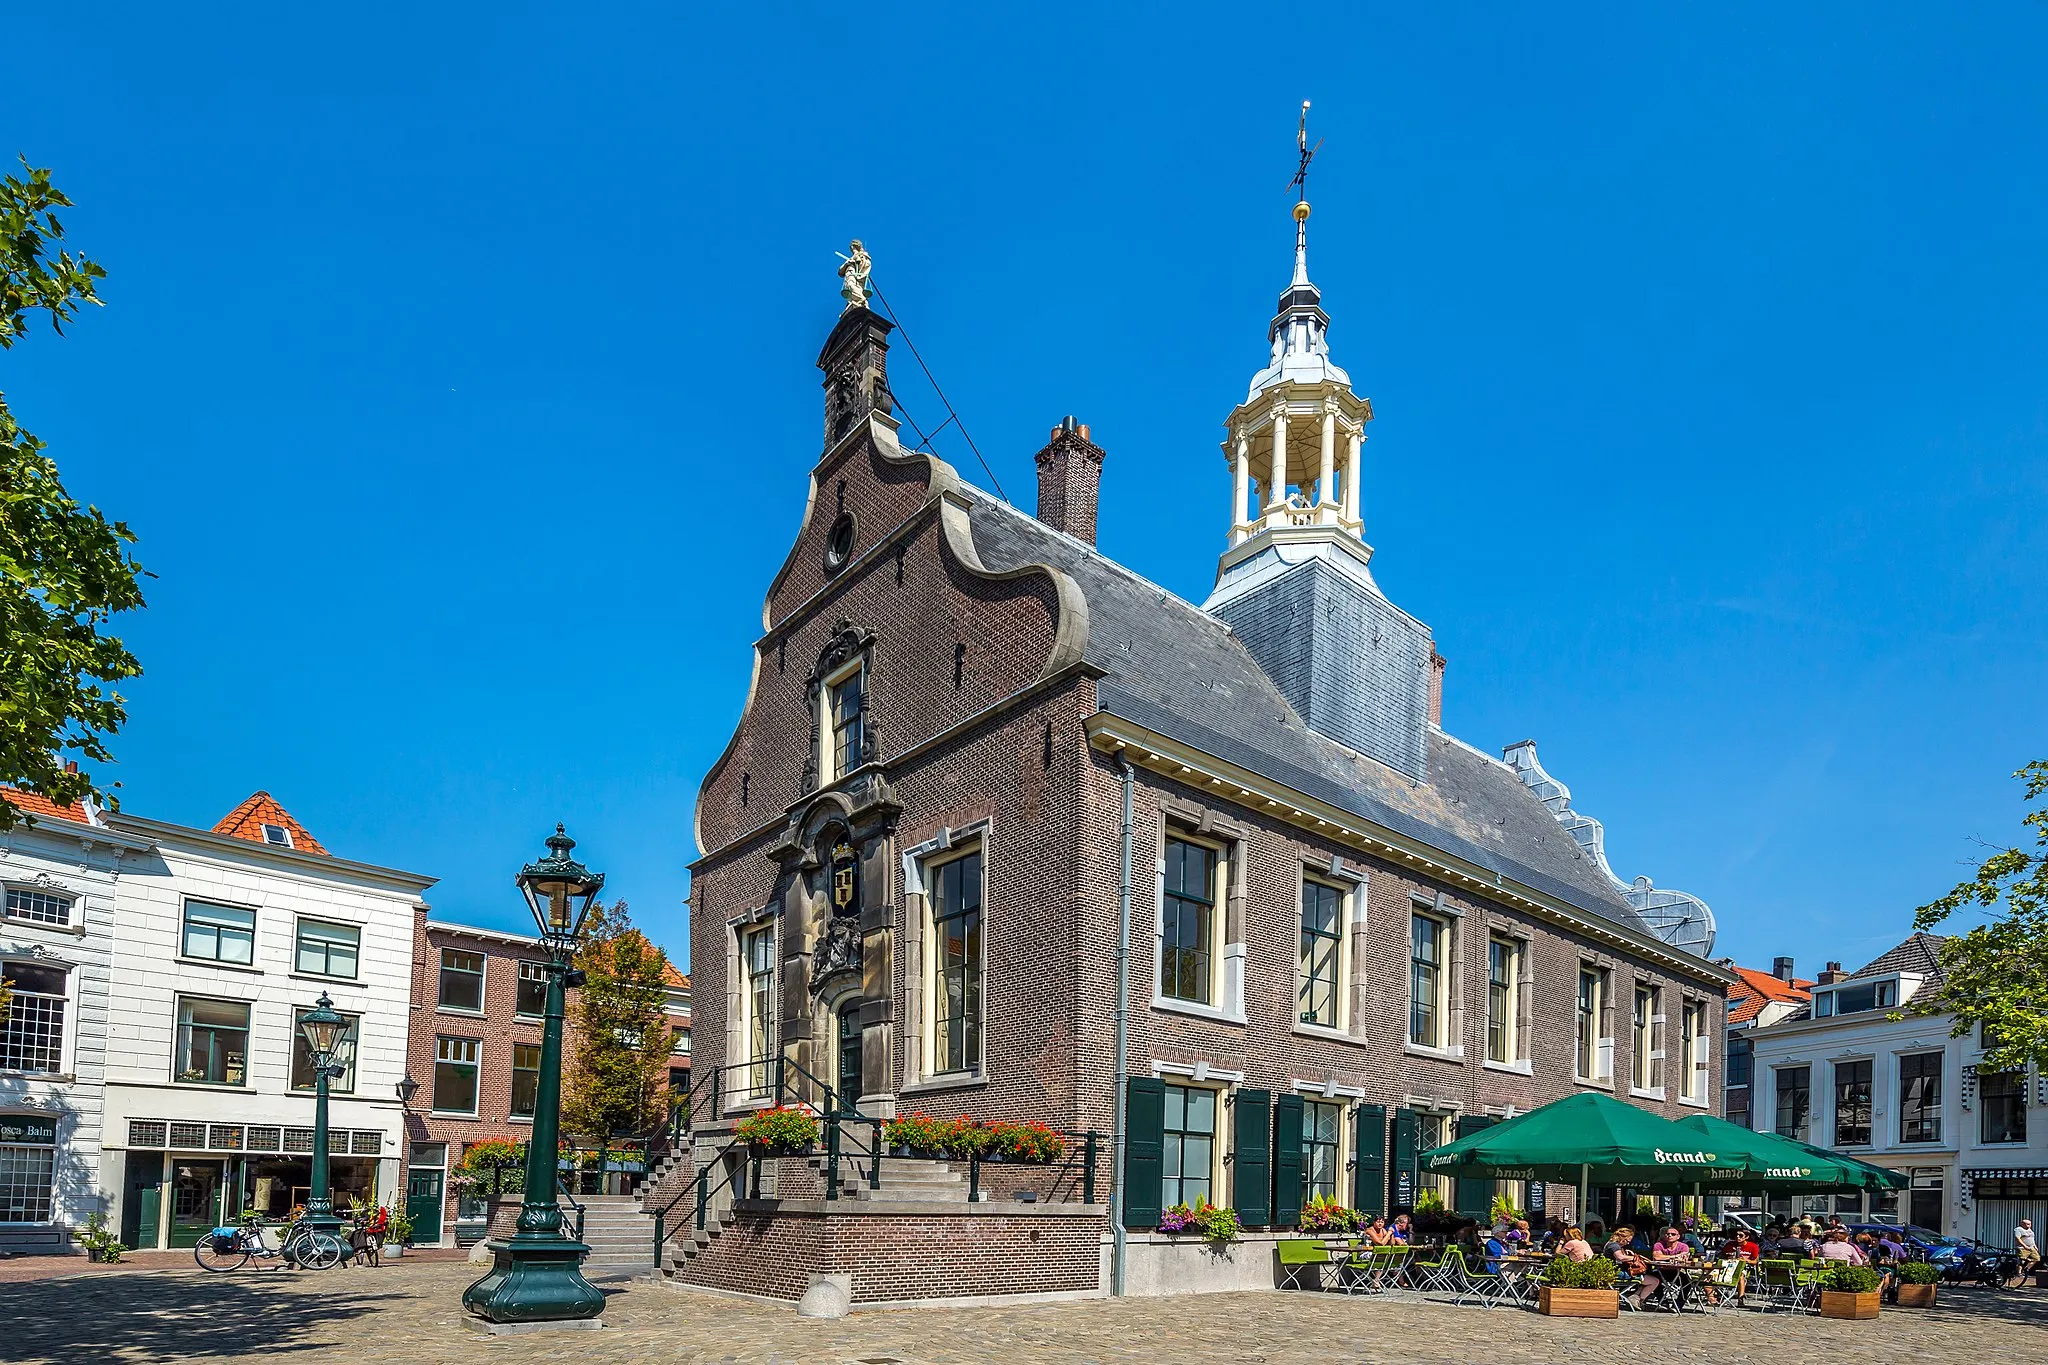 Photo showing: Old Town Hall, Schiedam (2015/08)
Following vandalization (Rotterdam) of my work, final stop of this series on European cities.
My work not being respected, I definitively stop my publications in Wikimedia Commons (including definition and quality updates).

Final publication in Wikimedia Commons: https://commons.wikimedia.org/wiki/File:GraphyArchy_-_Wikipedia_00982.jpg